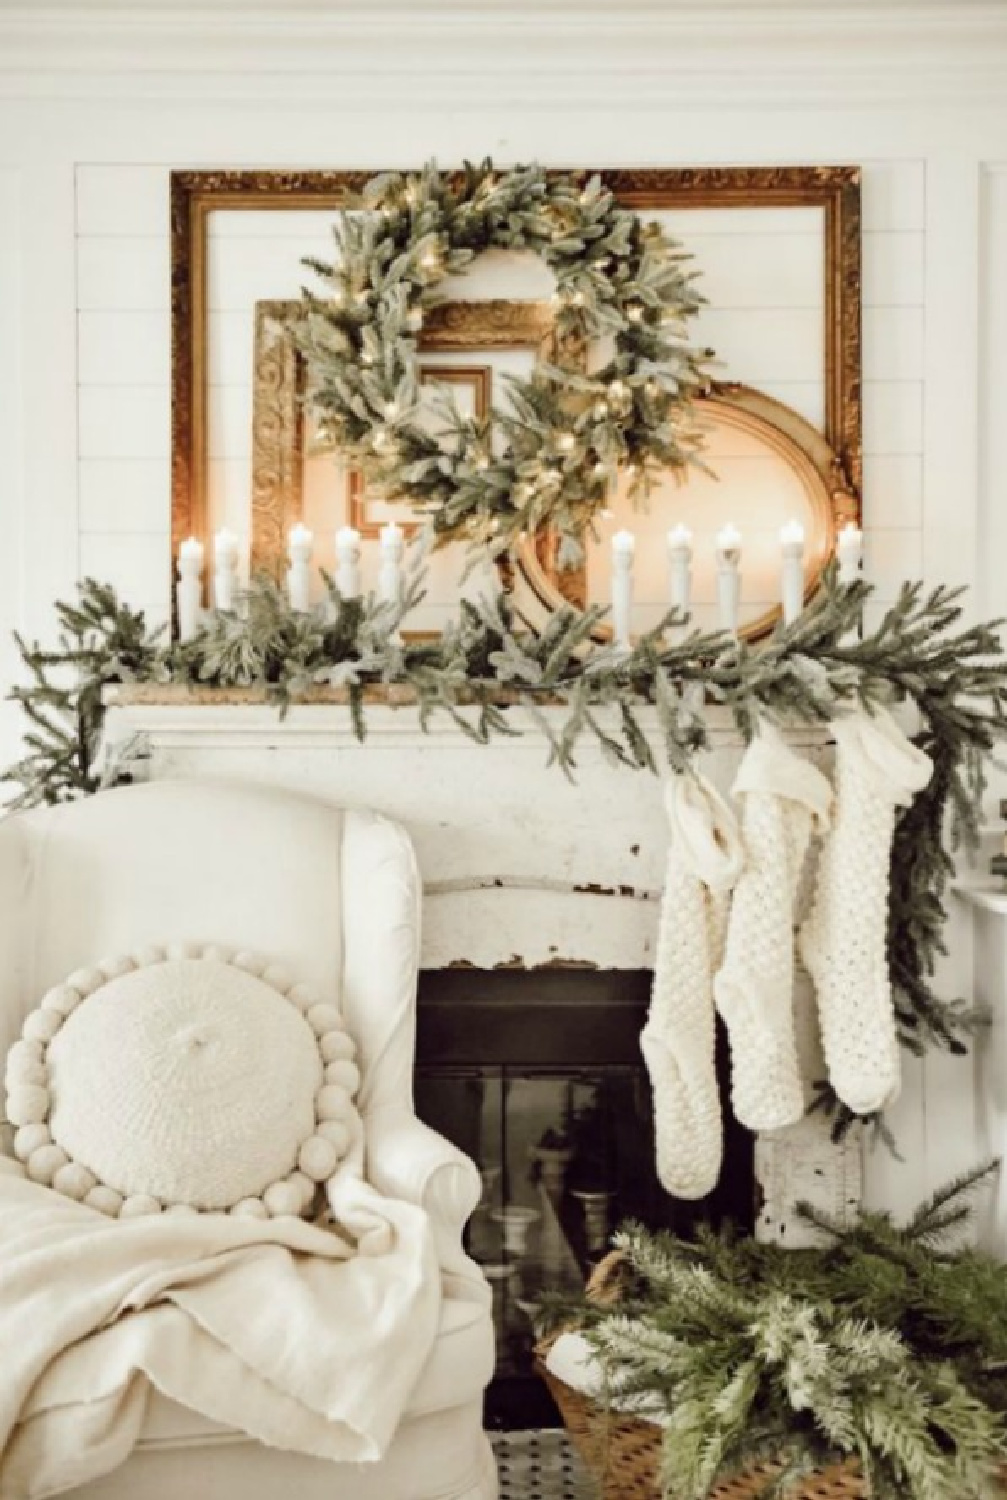 Farmhouse Christmas fireplace decor with garland, stockings, wreath, and candlelight - Liz Marie Blog. #christmasfireplace #farmhousechristmas